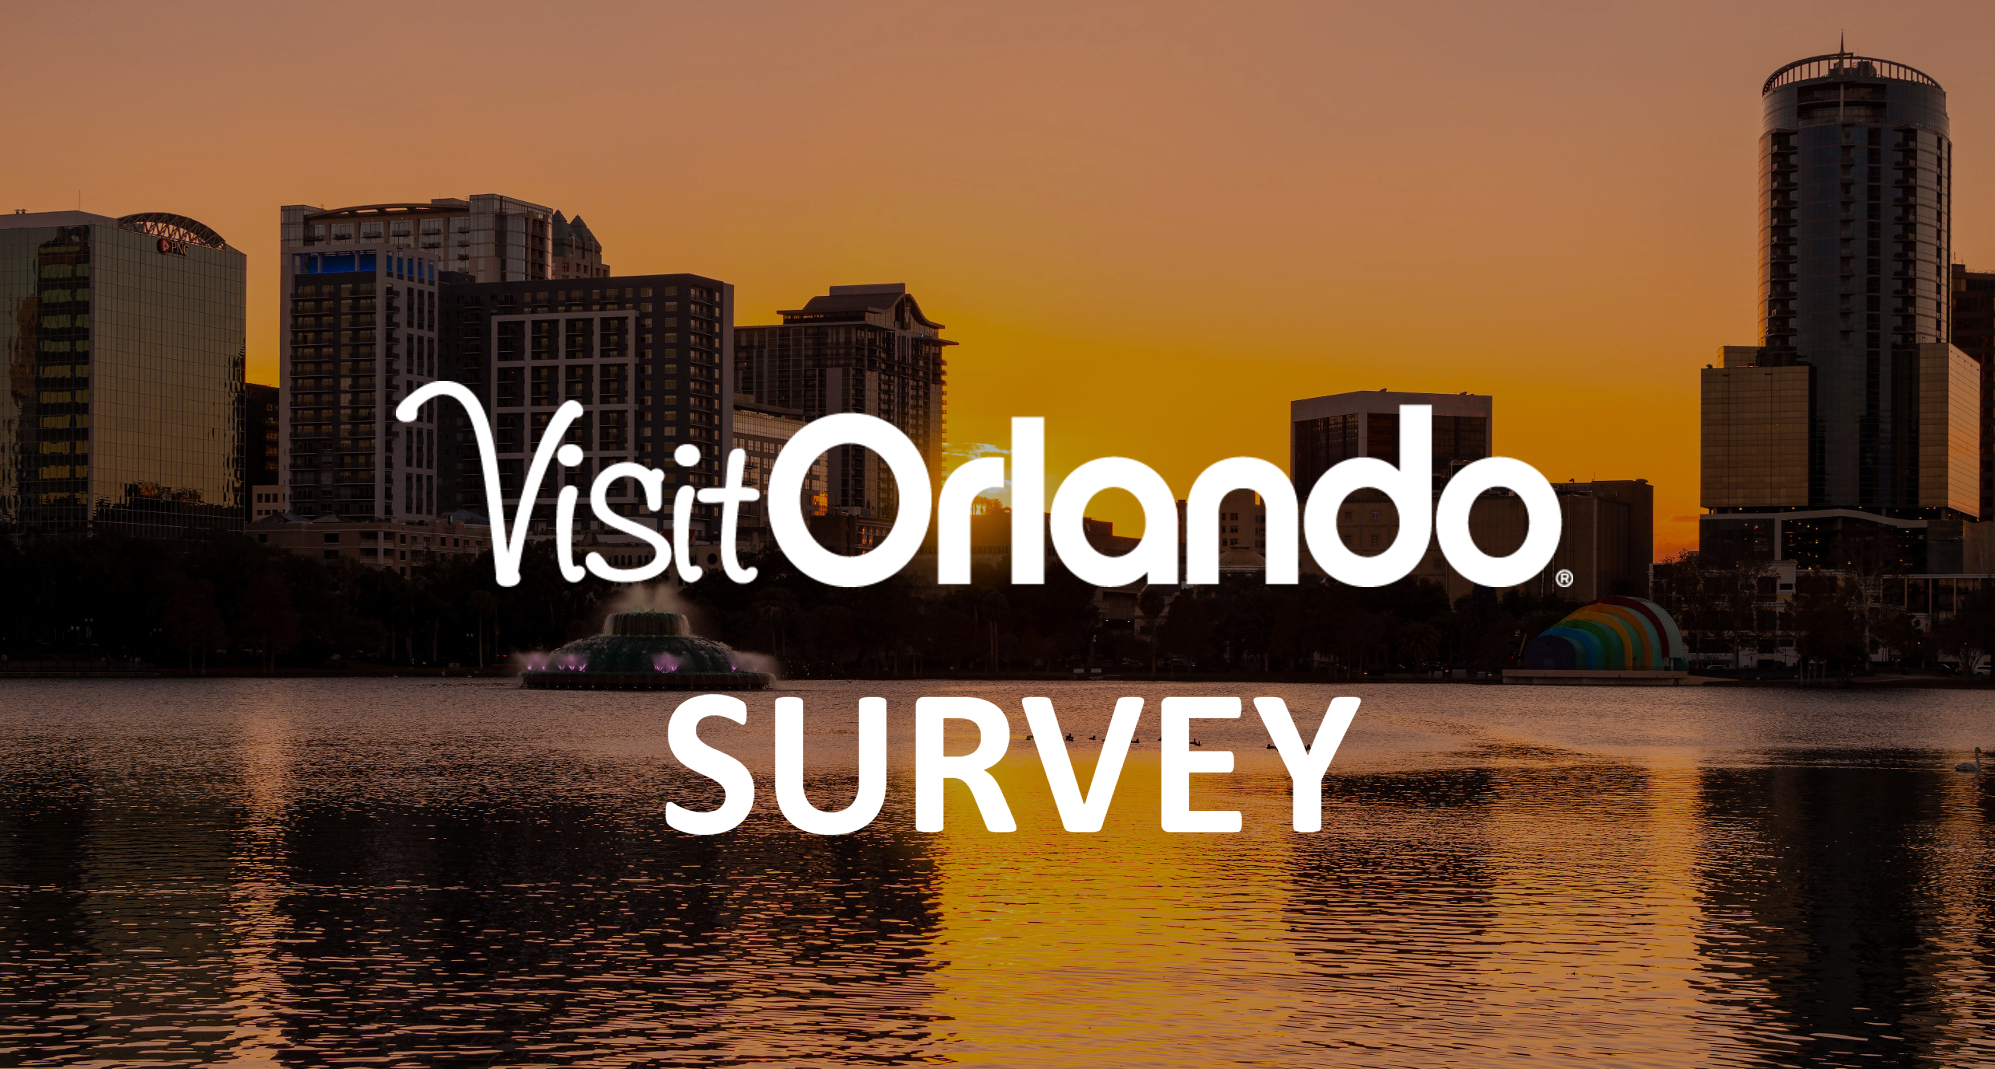 Visit Orlando invites you to share your valuable feedback on the destination in this survey.